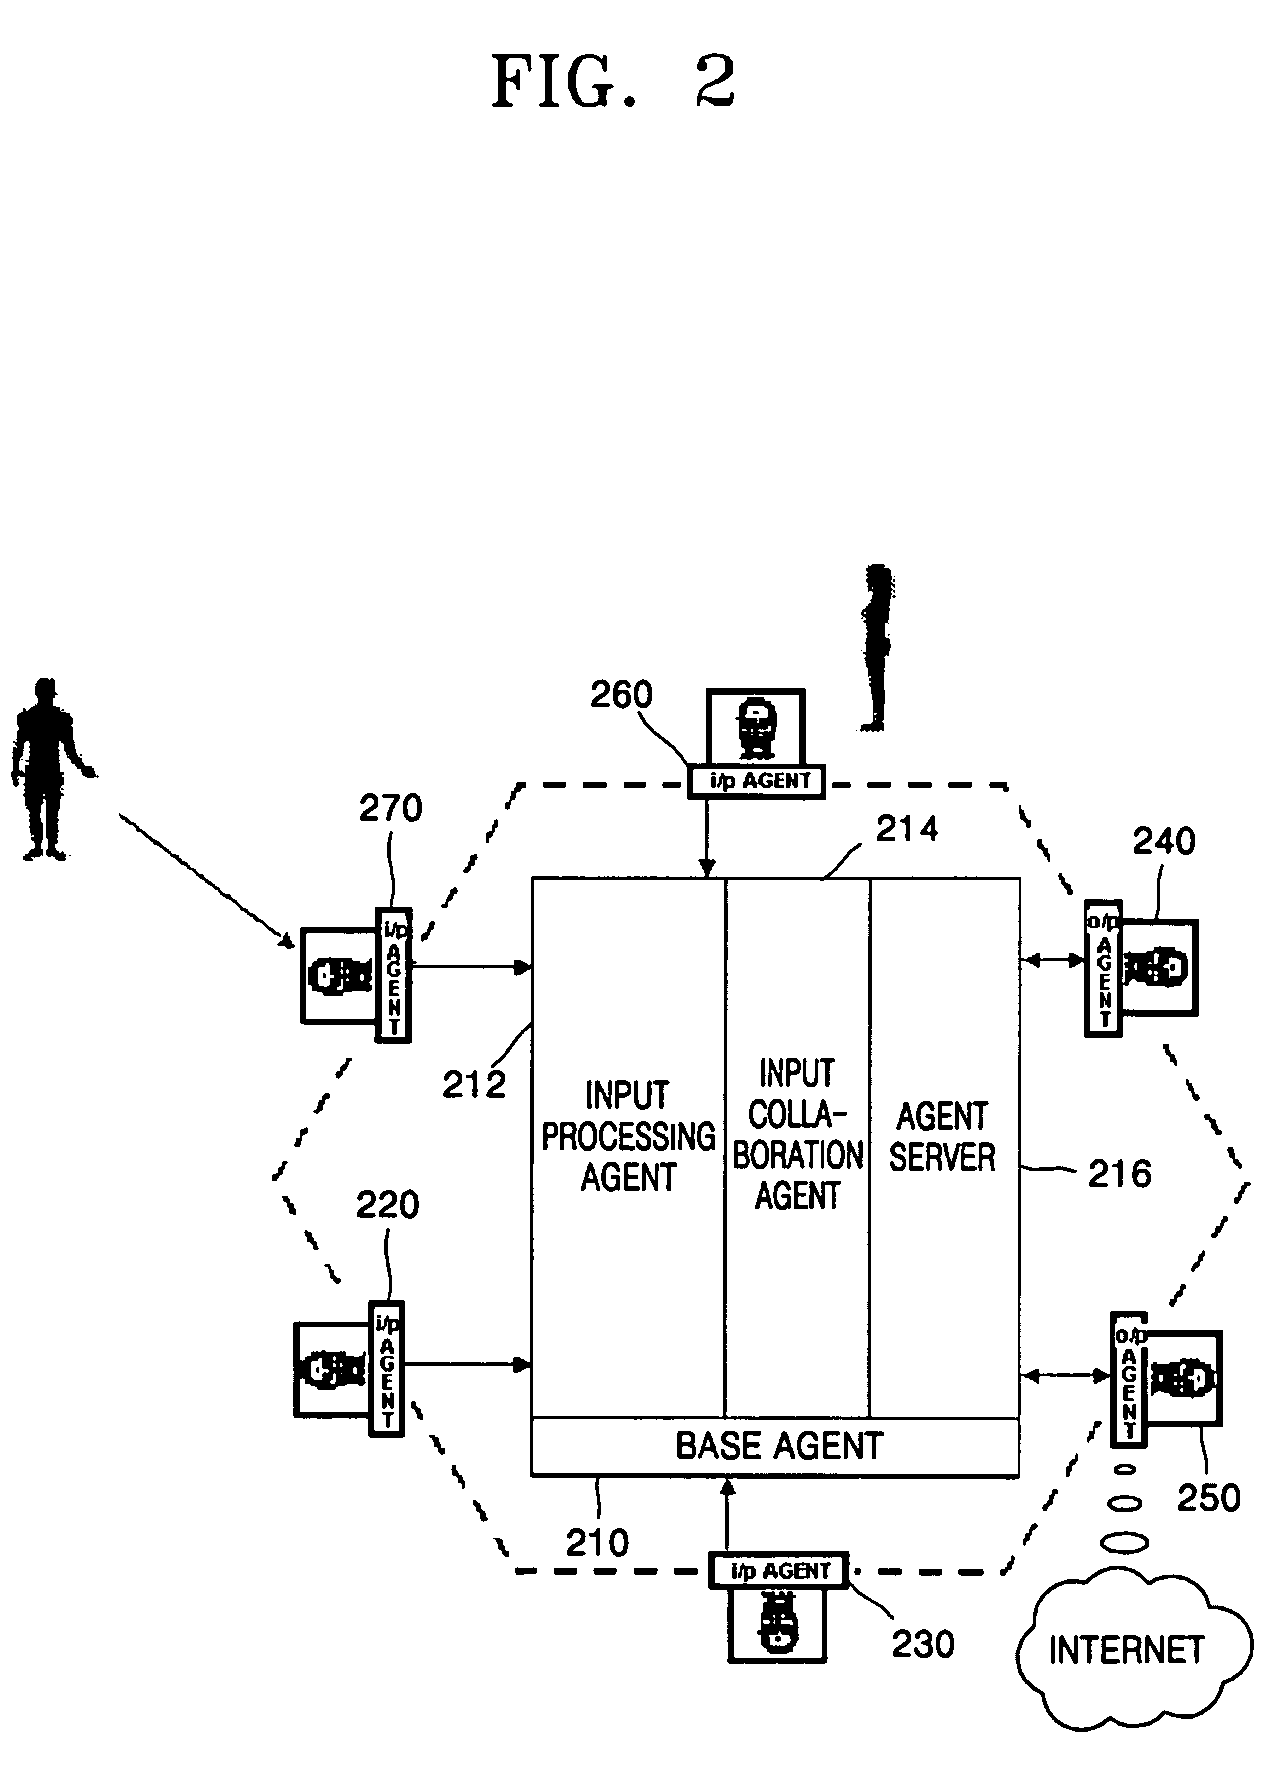 System and method for multi-modal context-sensitive applications in home network environment